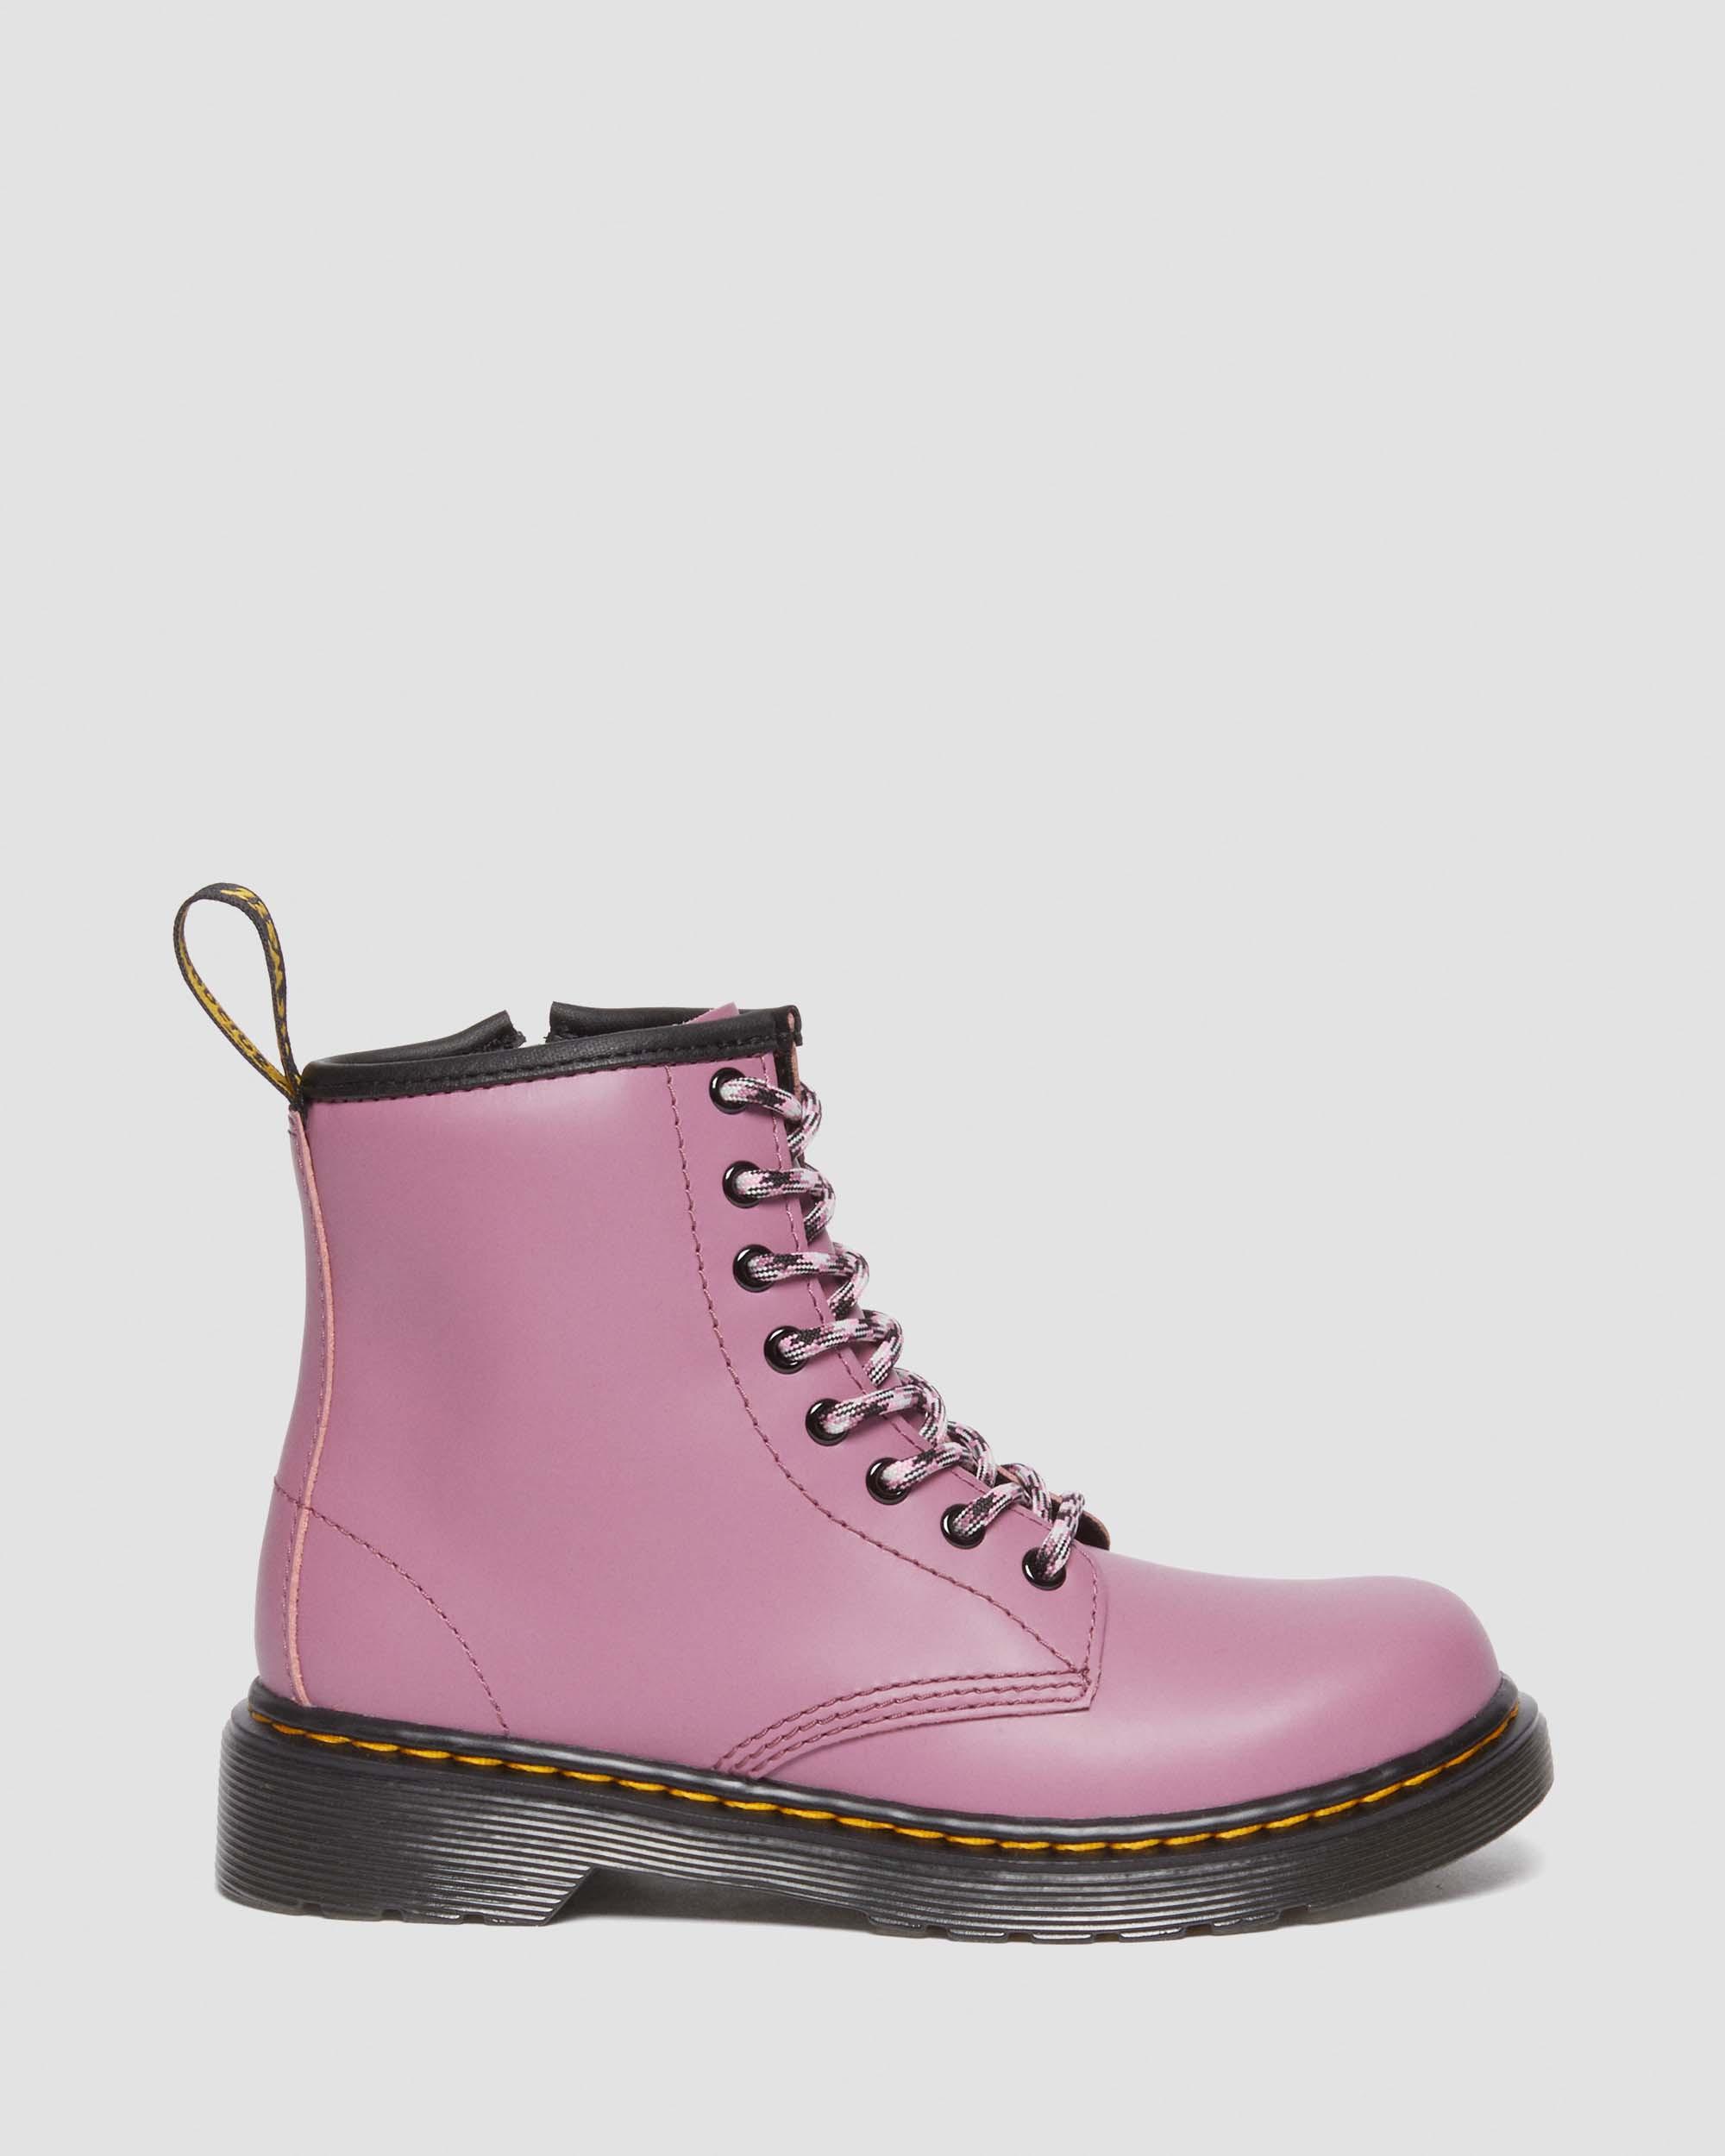 Junior 1460 Muted Leather Lace Up Boots in Muted Purple